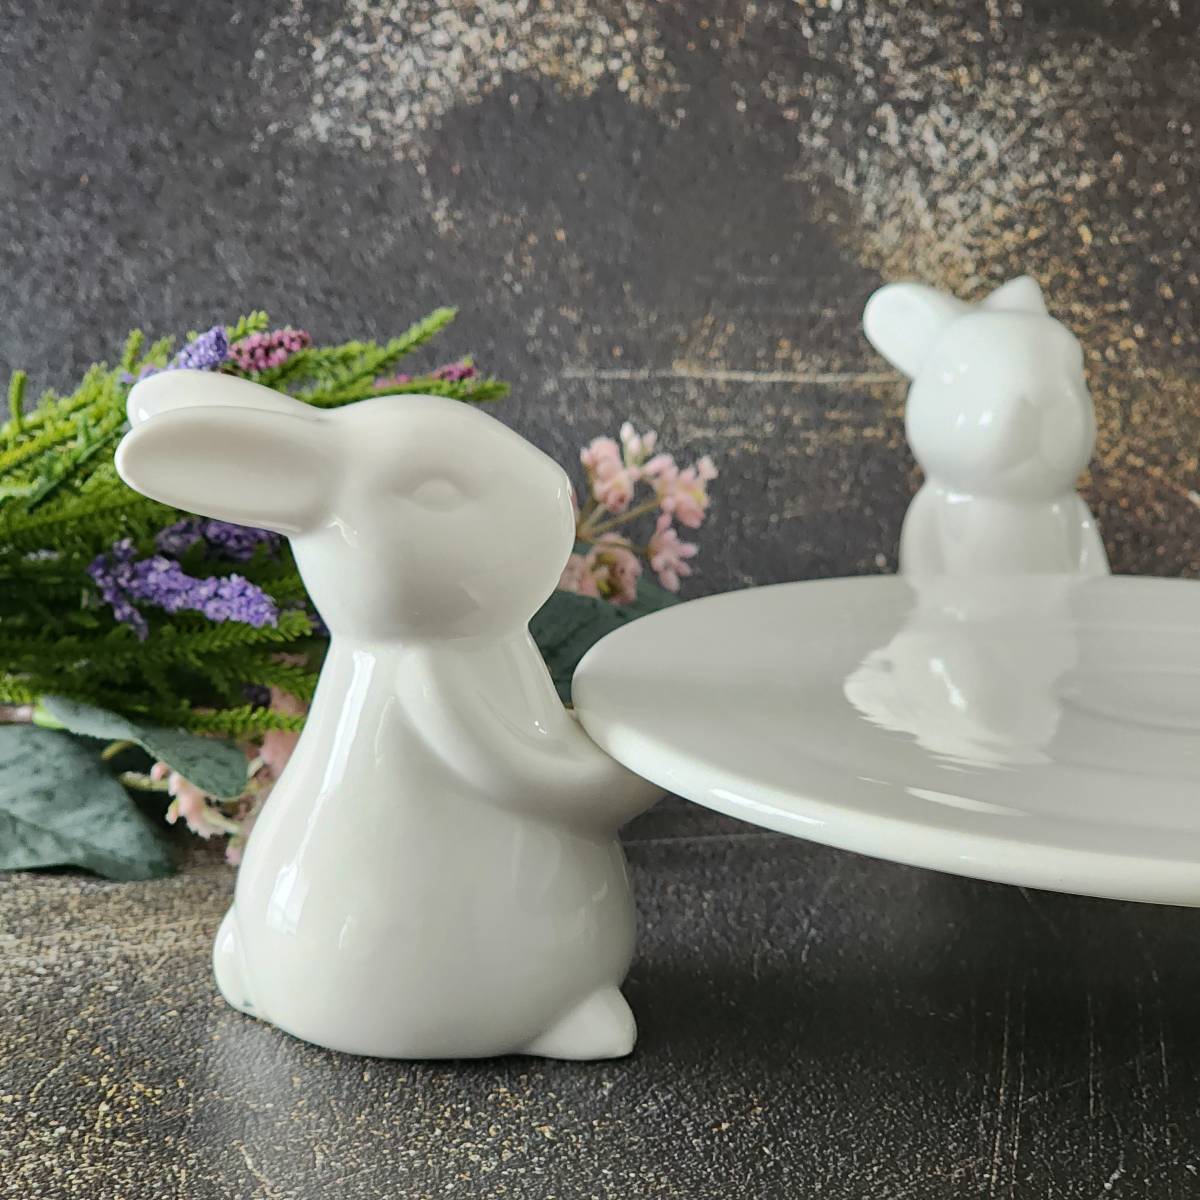  new goods pretty ... Chan cake stand H-771